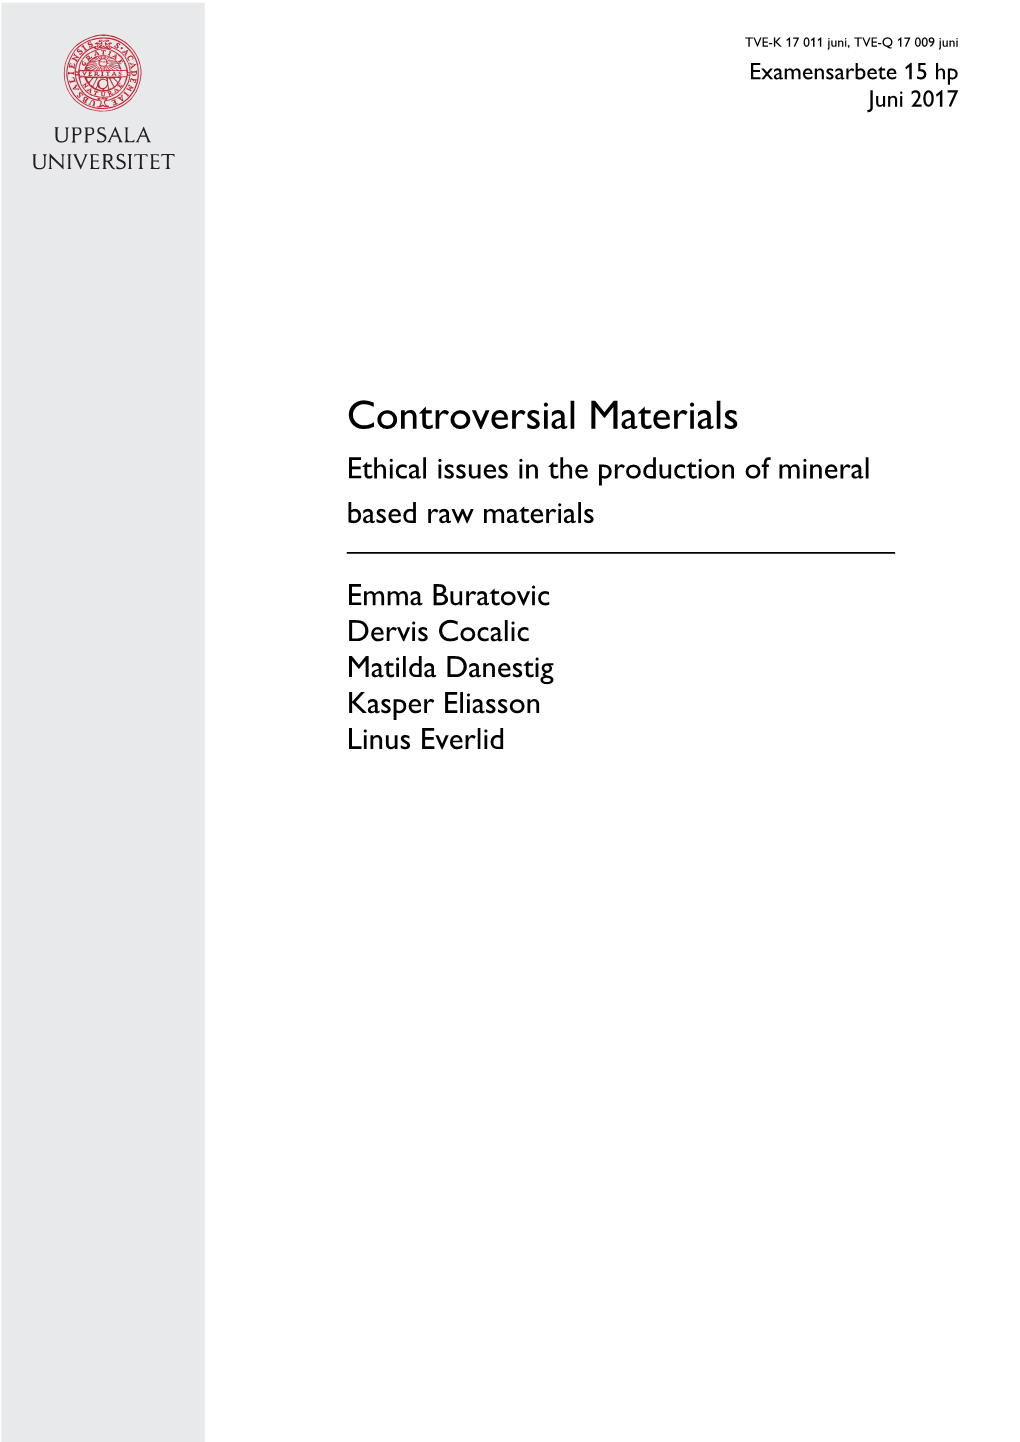 Controversial Materials Ethical Issues in the Production of Mineral Based Raw Materials